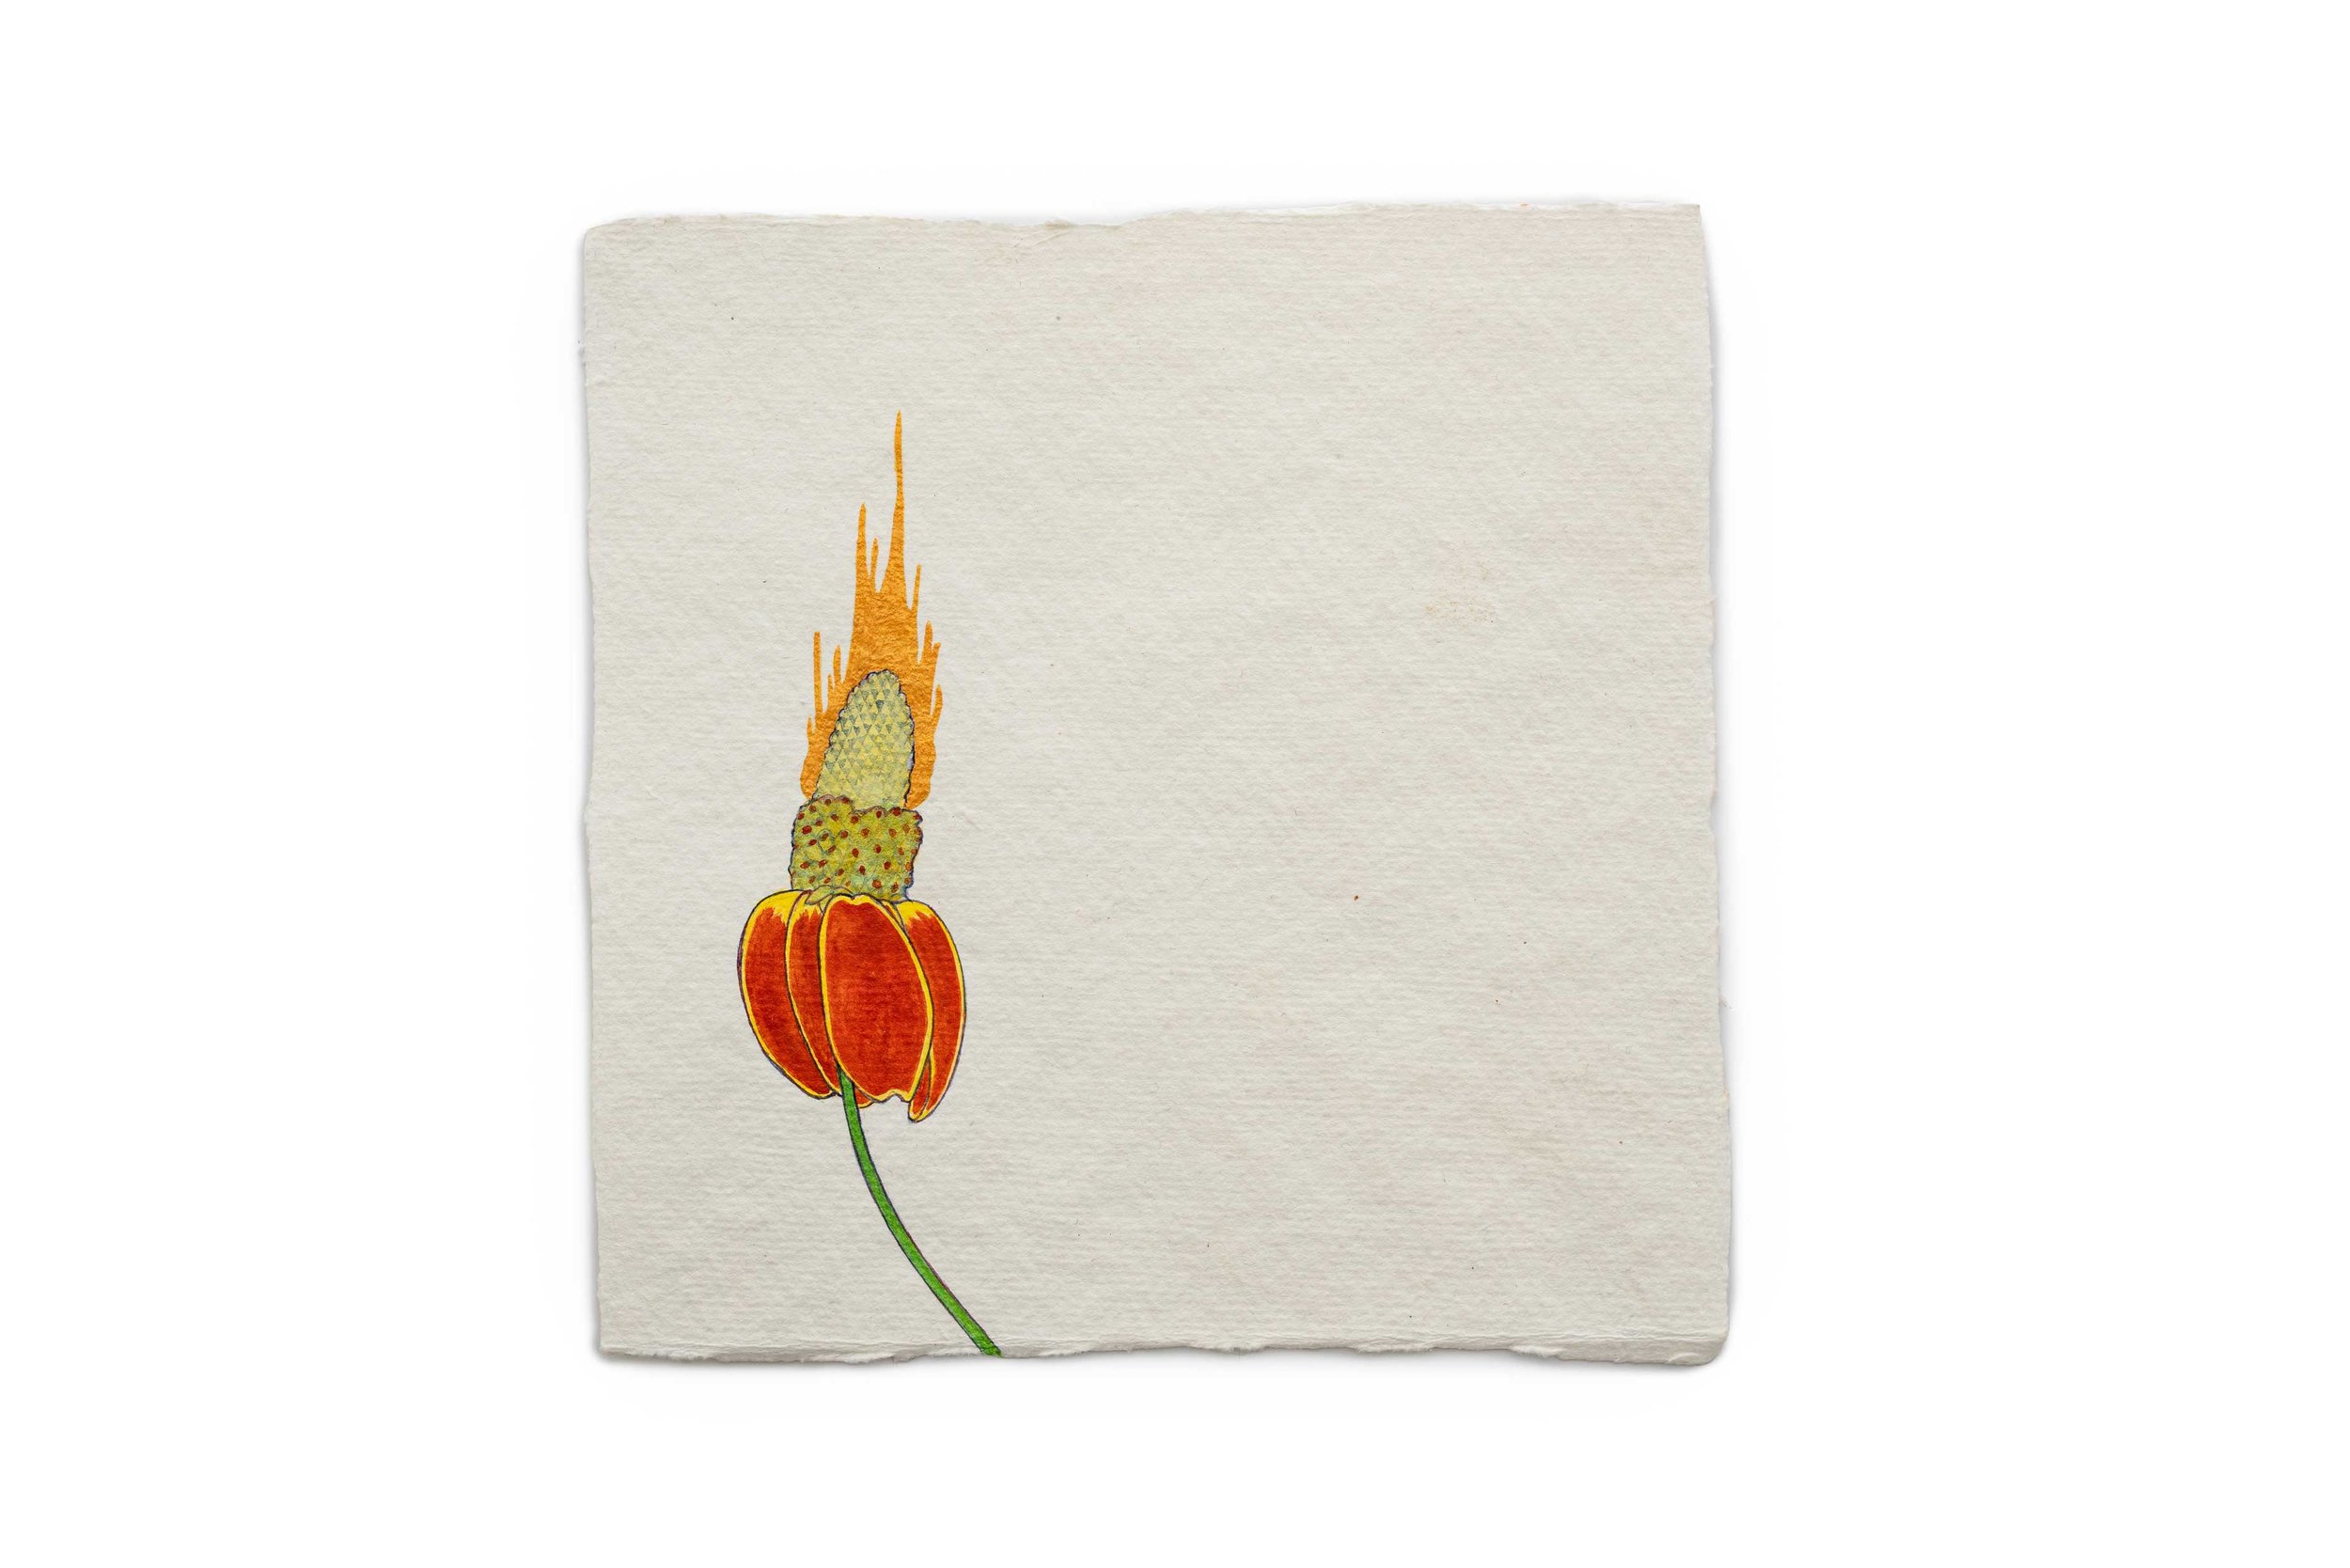   Fire Diary (Prairie Coneflower) , 2019 Acrylic on paper, 6” x 6”    View Next Set →   